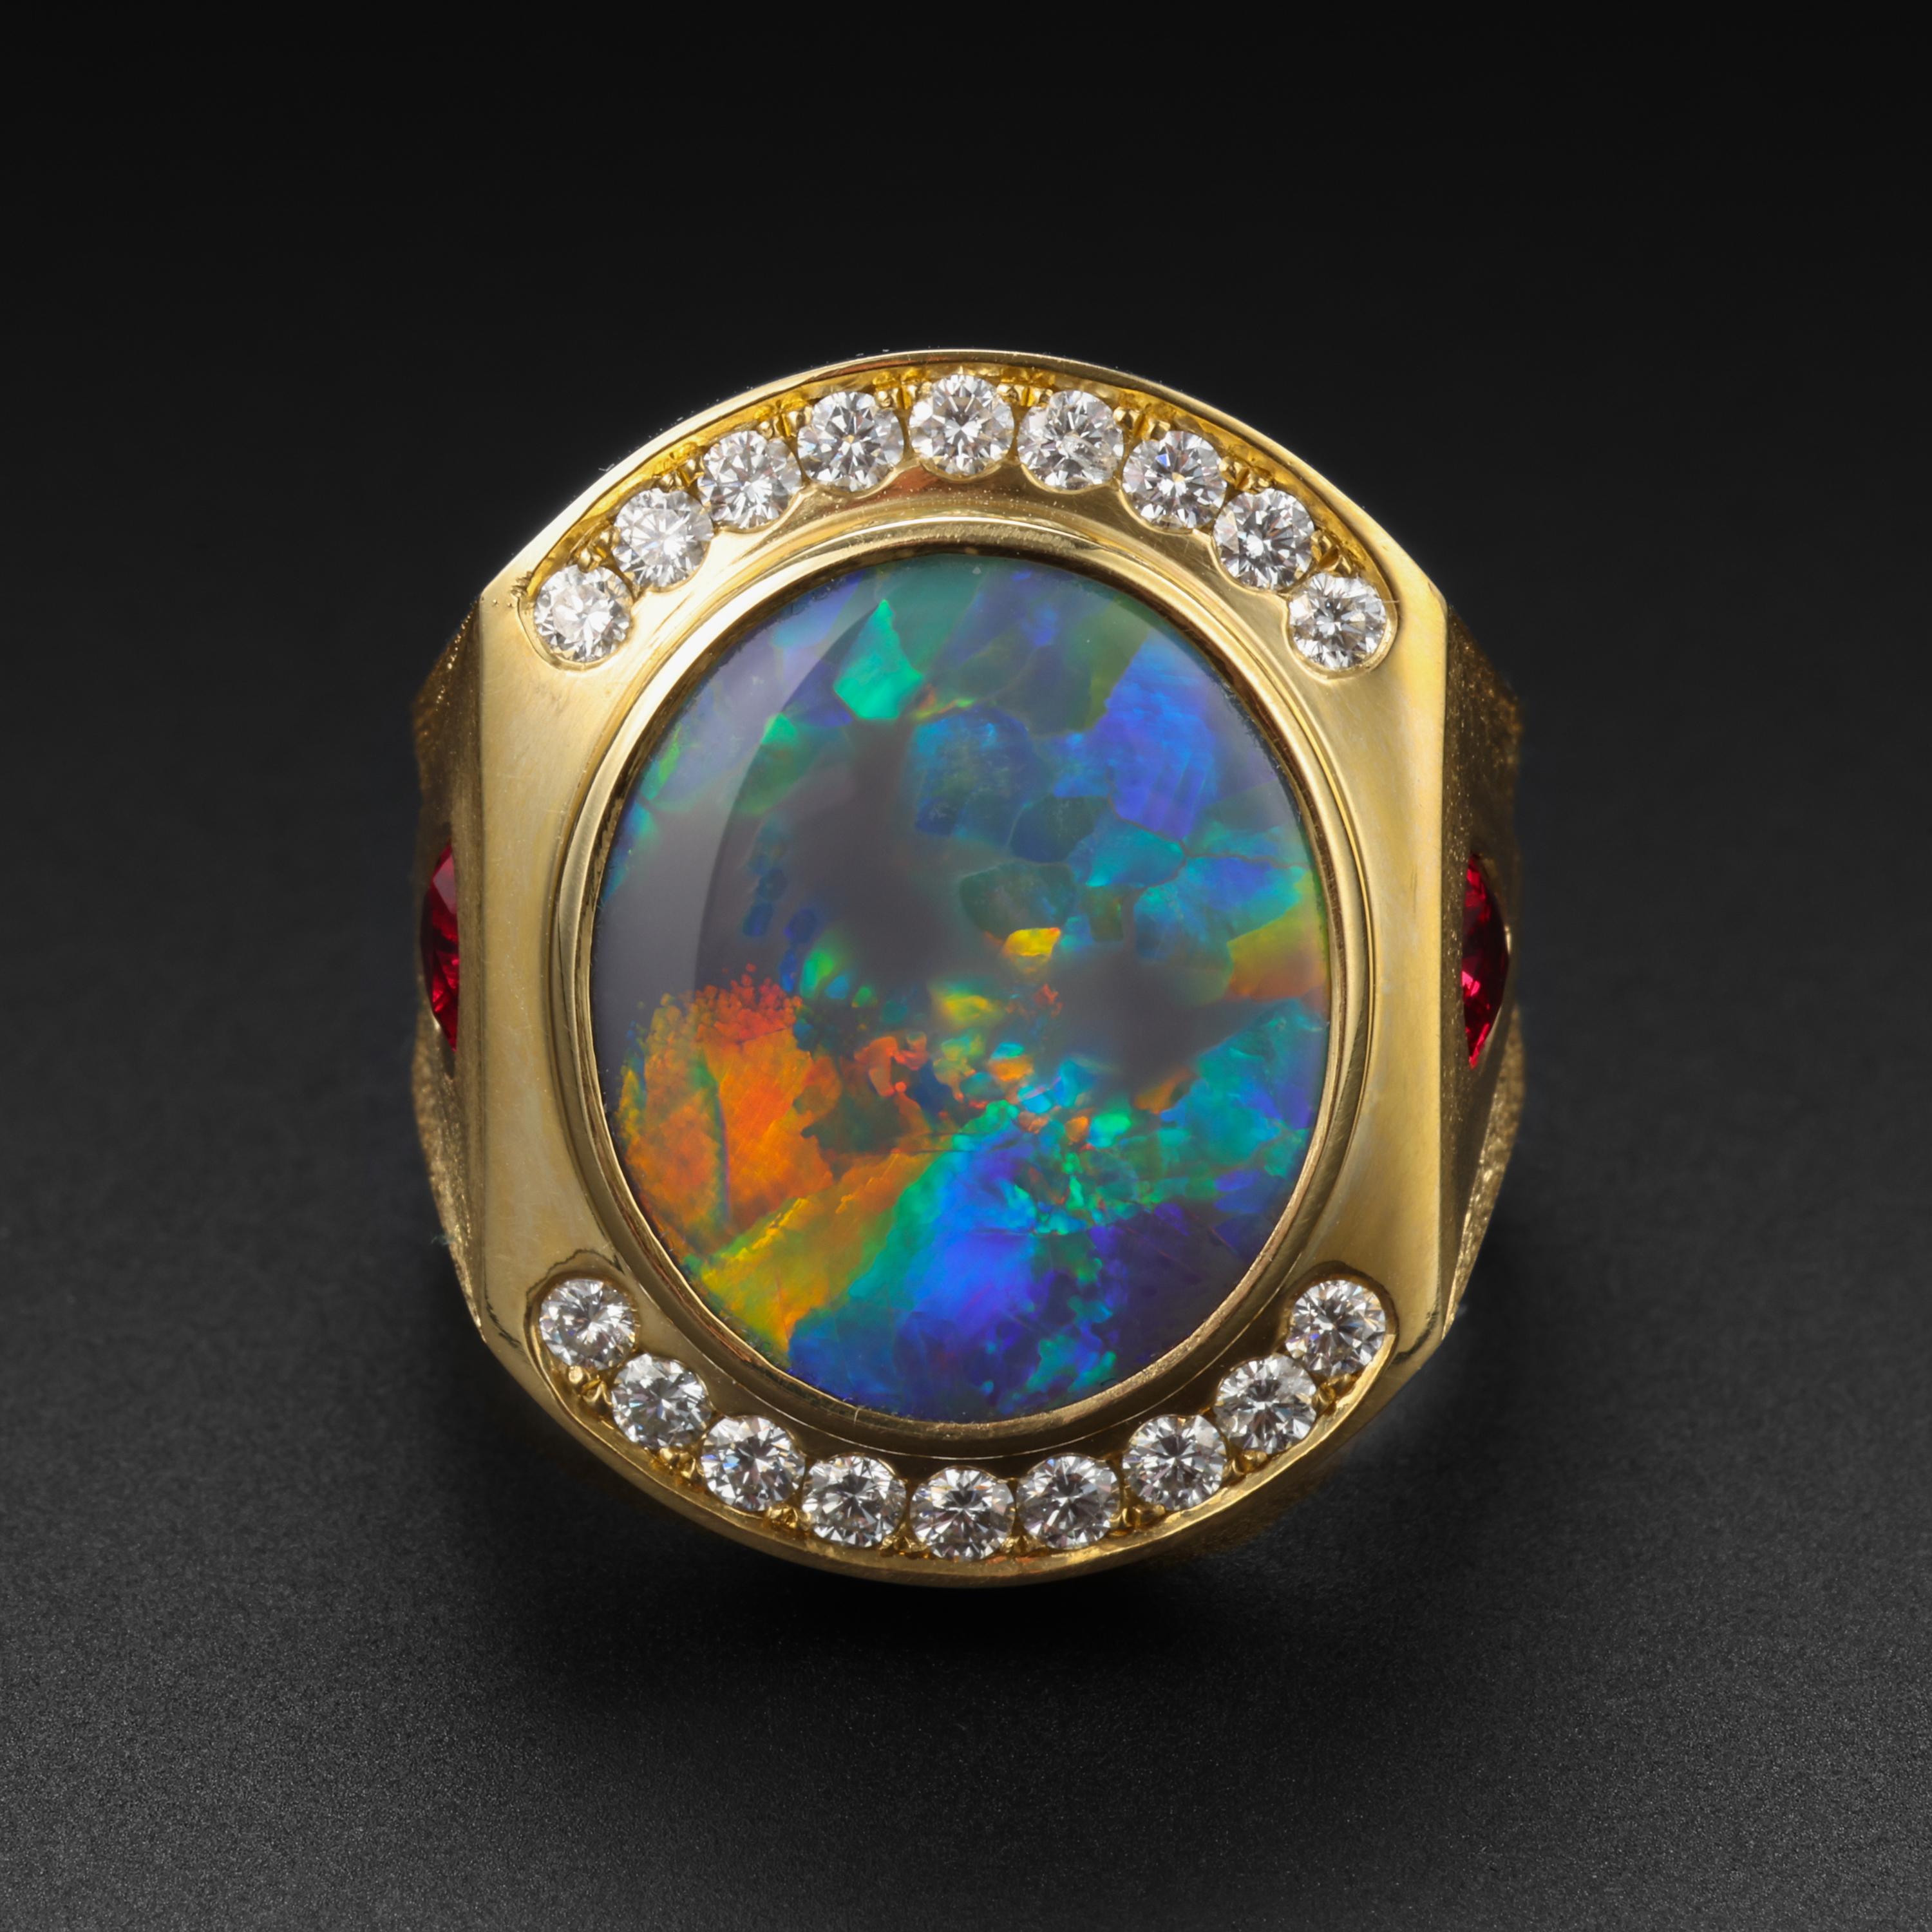 The finest solid black opal from Australia's legendary Lightning Ridge mine, aflame with vivid red and orange -the rarest colors of black opal- in a swirling sea of blues, greens and yellows is the mesmerizing centerpiece of this iconic men's opal